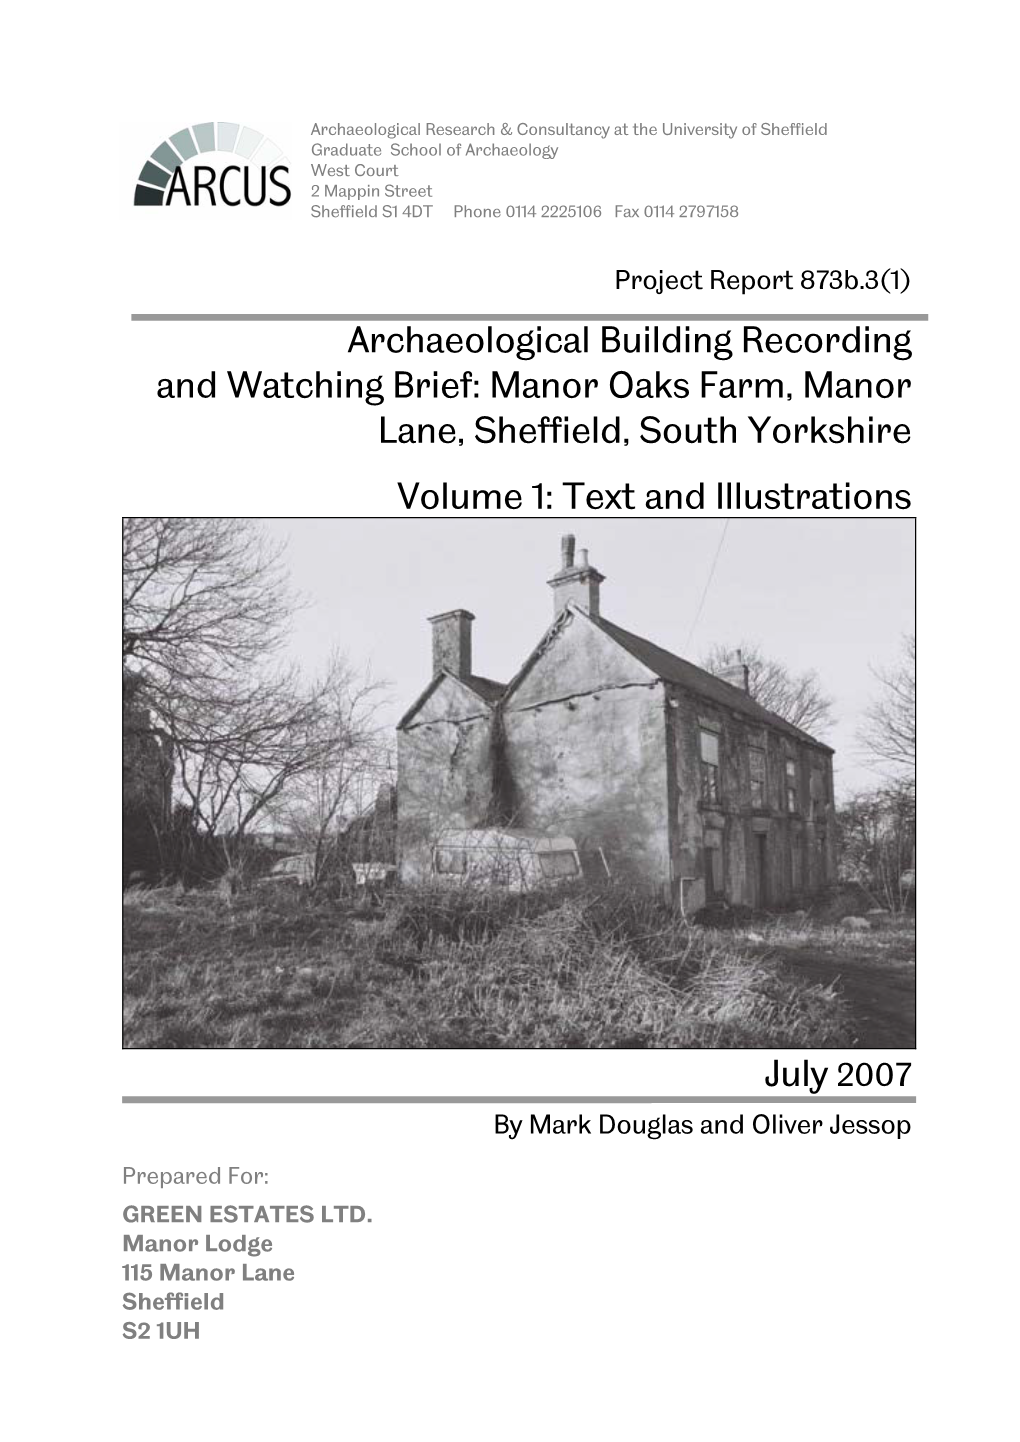 Manor Oaks Farm, Manor Lane, Sheffield, South Yorkshire Volume 1: Text and Illustrations